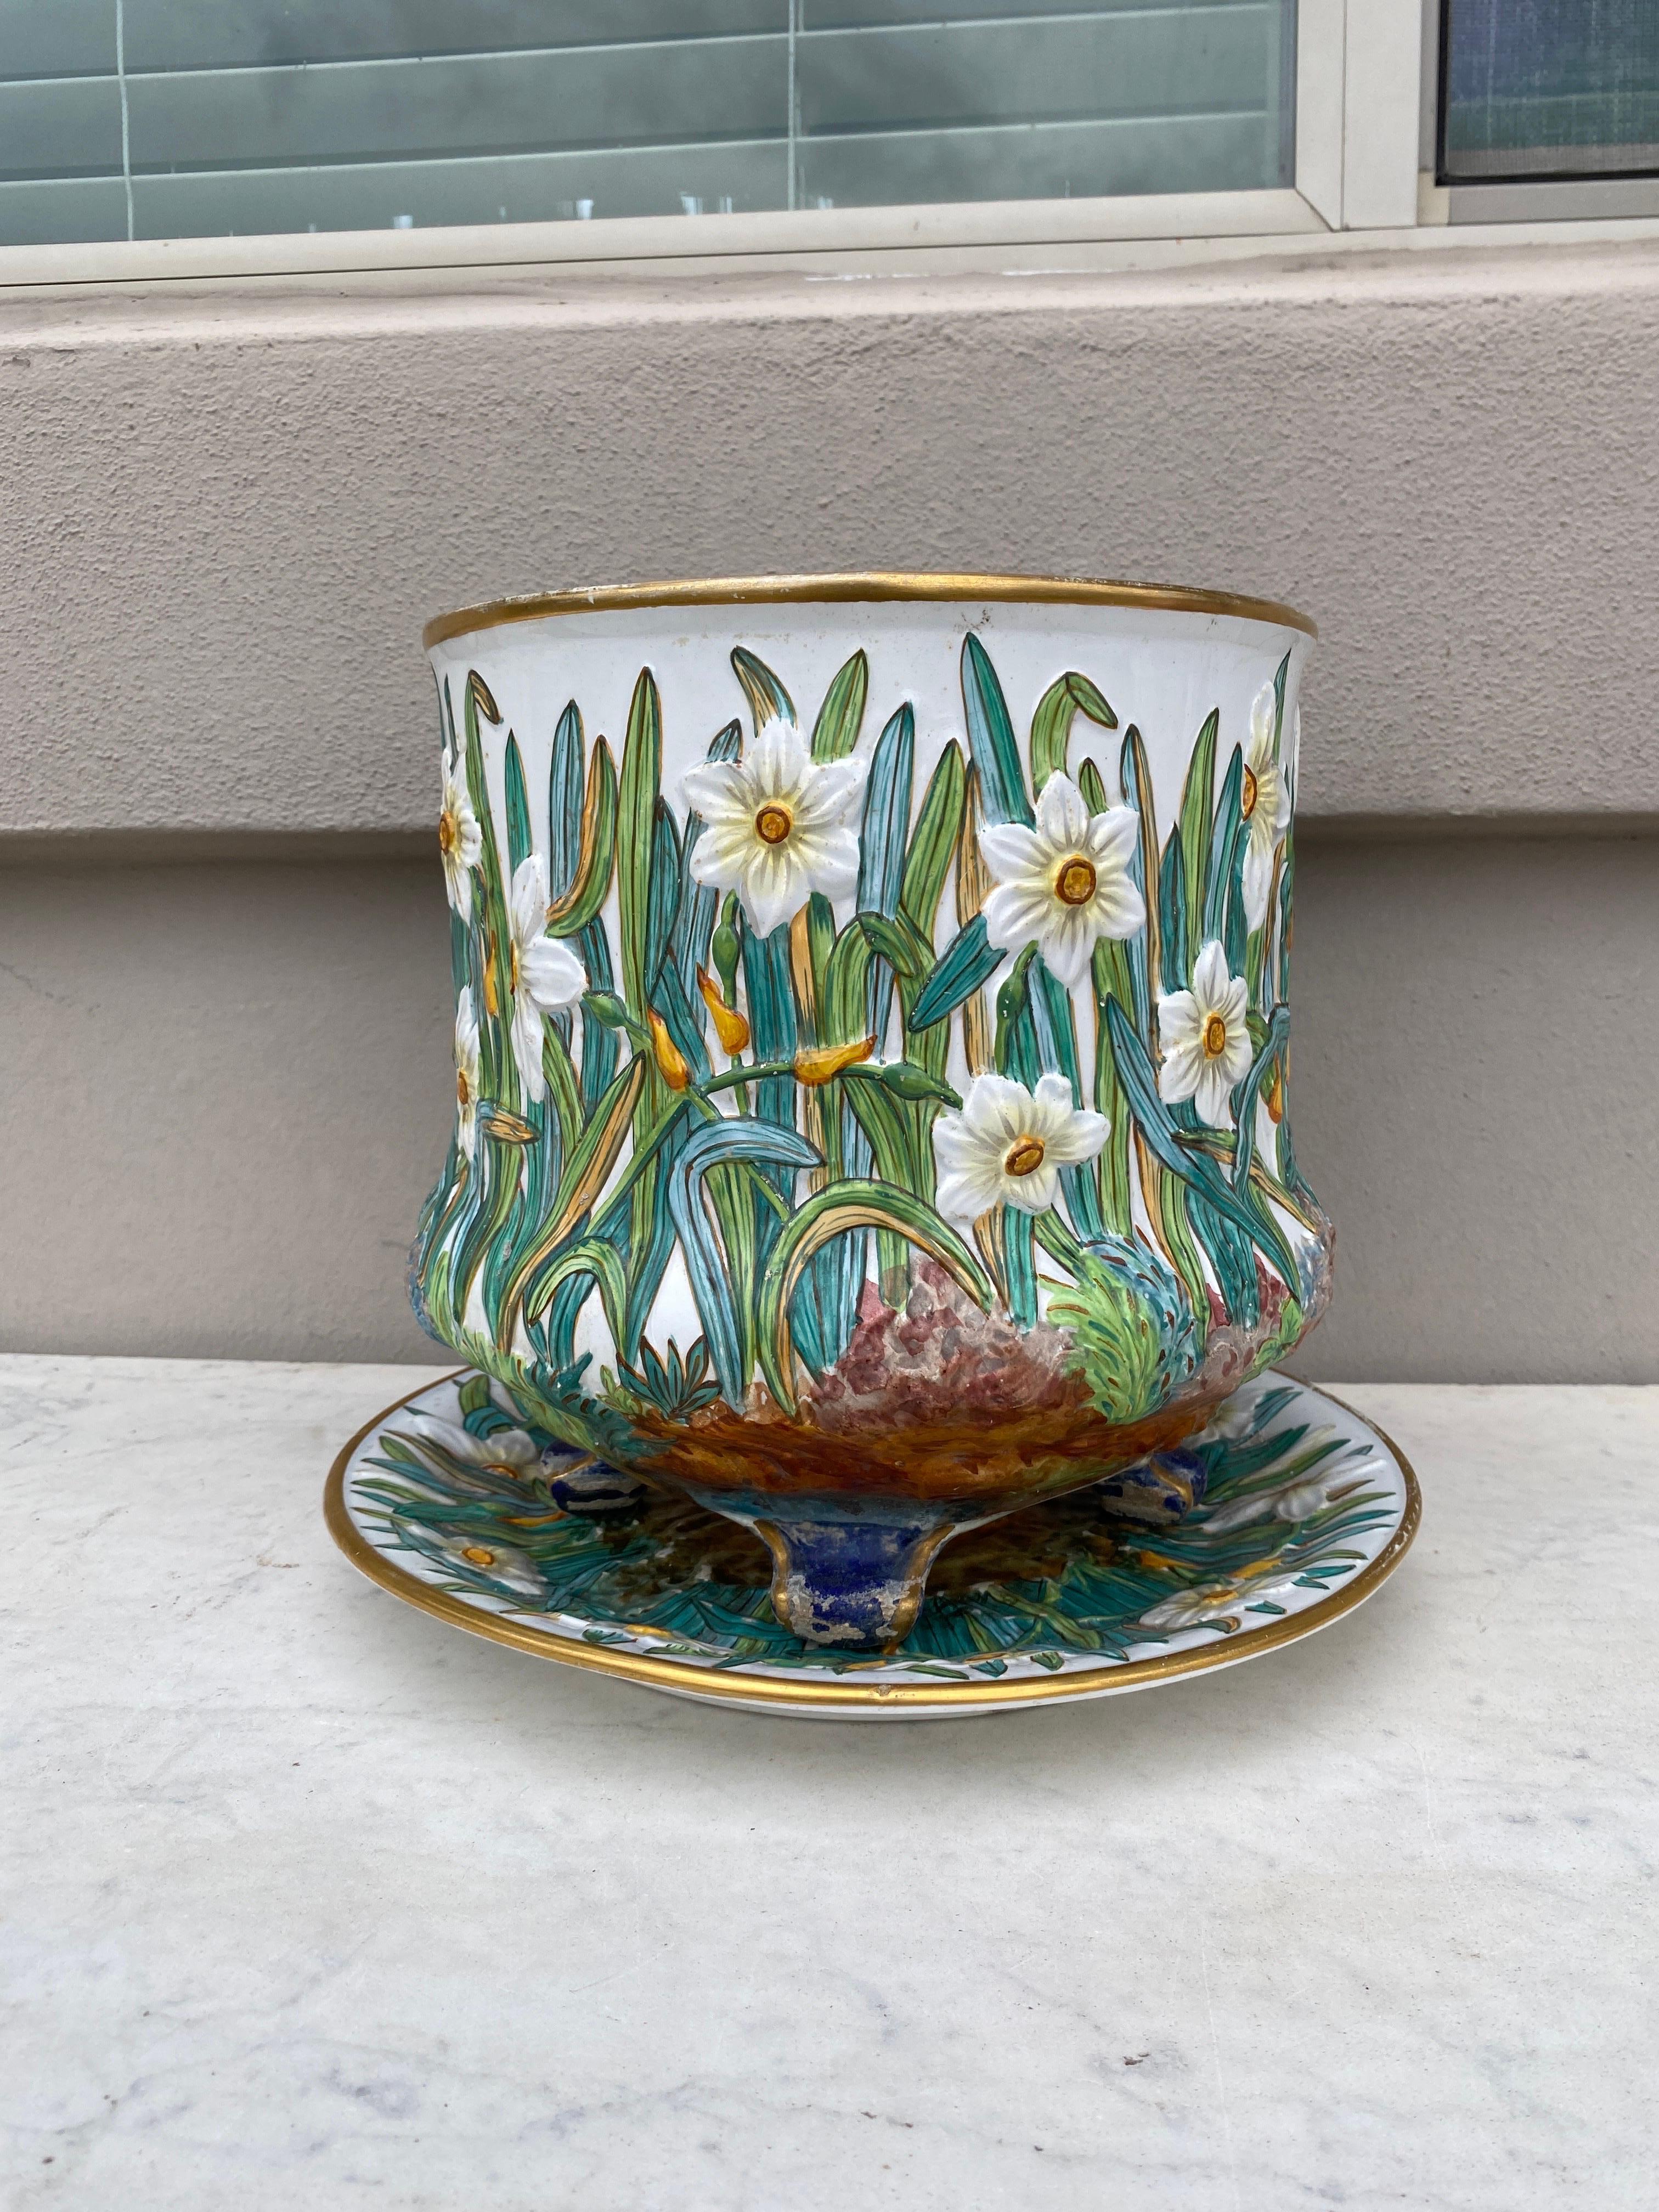 French Majolica Daffodil Cache Pot Creil & Montereau, Circa 1890.
Total height / 10.3 inches.
Platter / 11.5 inches diameter.
Cache pot / height :9.3 inches, diameter: 10 inches.
